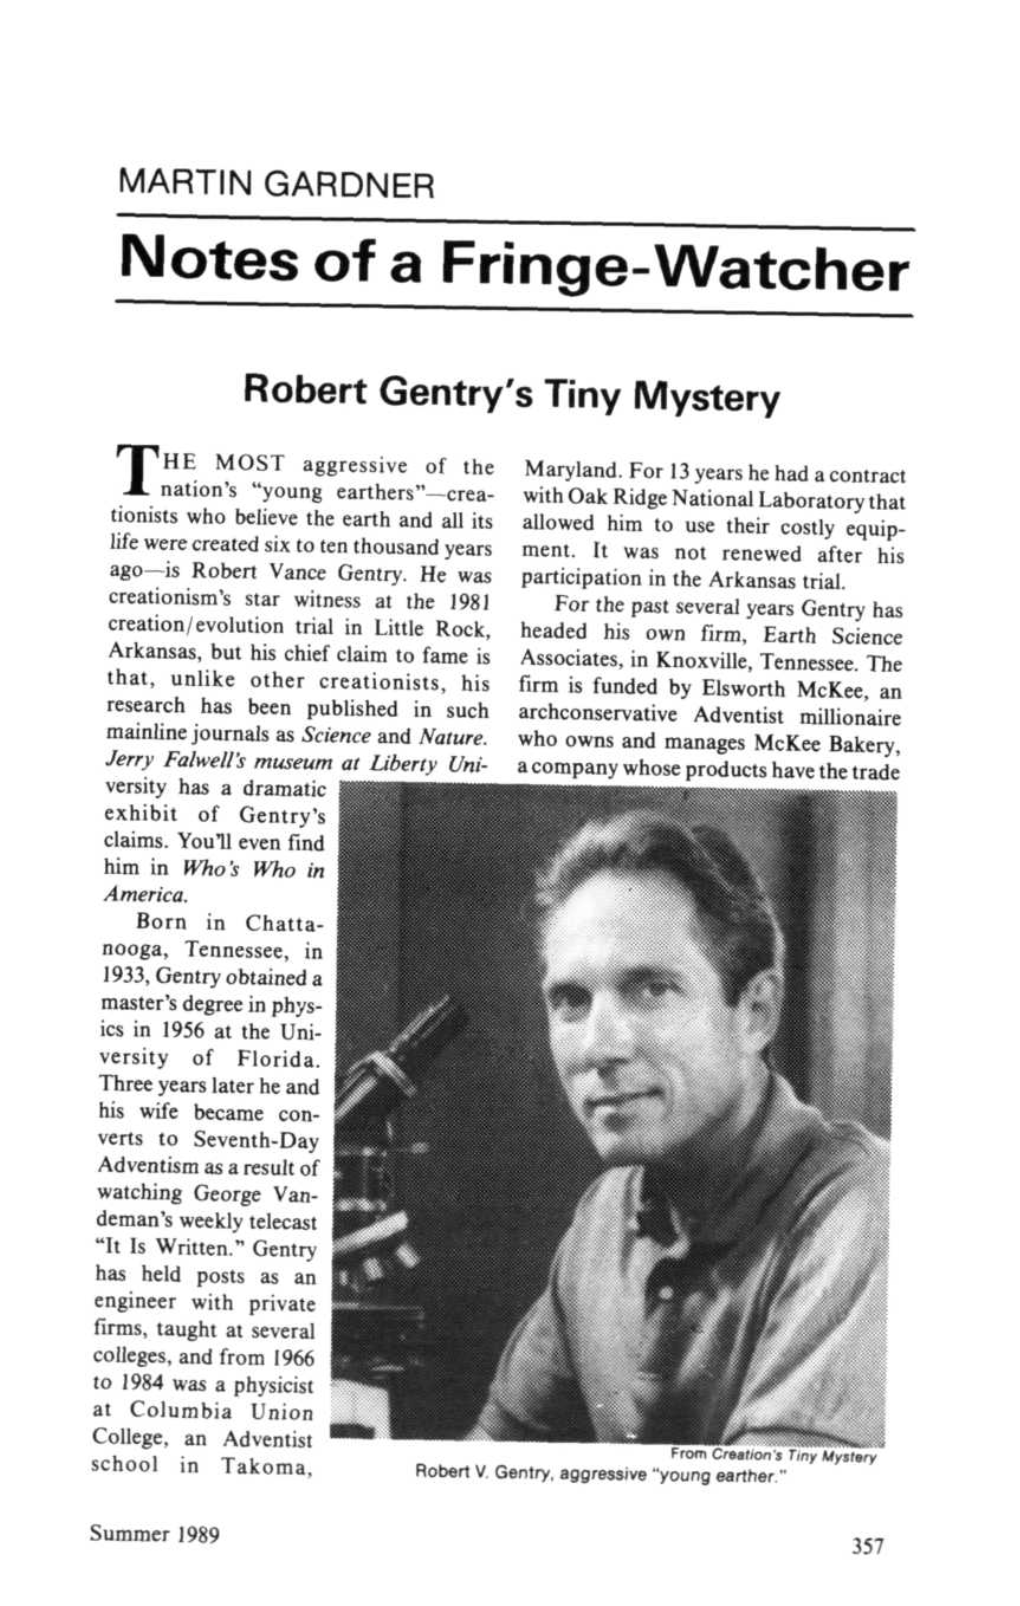 Notes of a Fringe-Watcher Robert Gentry's Tiny Mystery